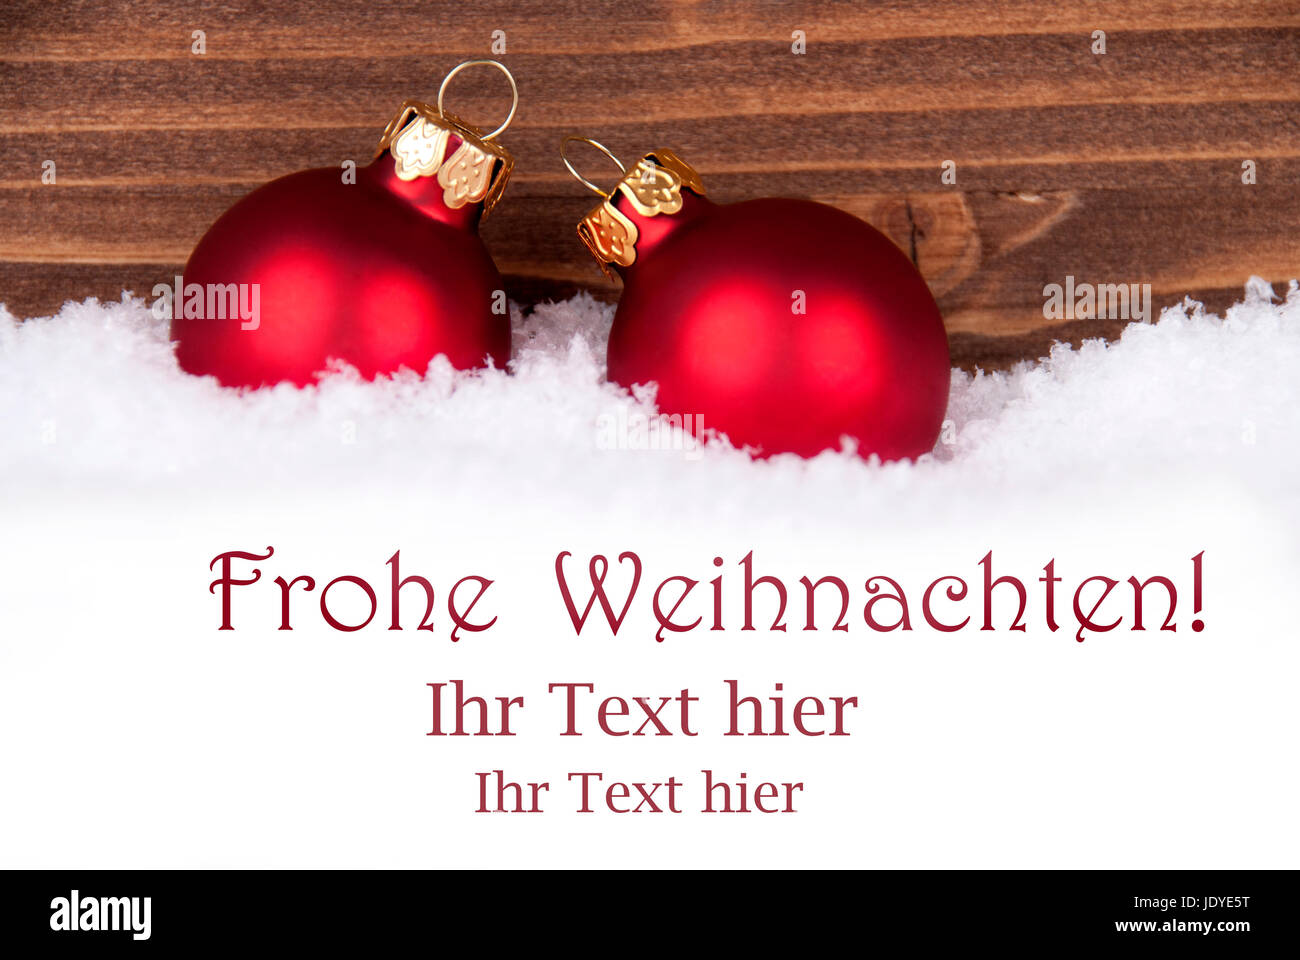 Frohe Weihnachten, german Christmas Greetings which means Merry ...